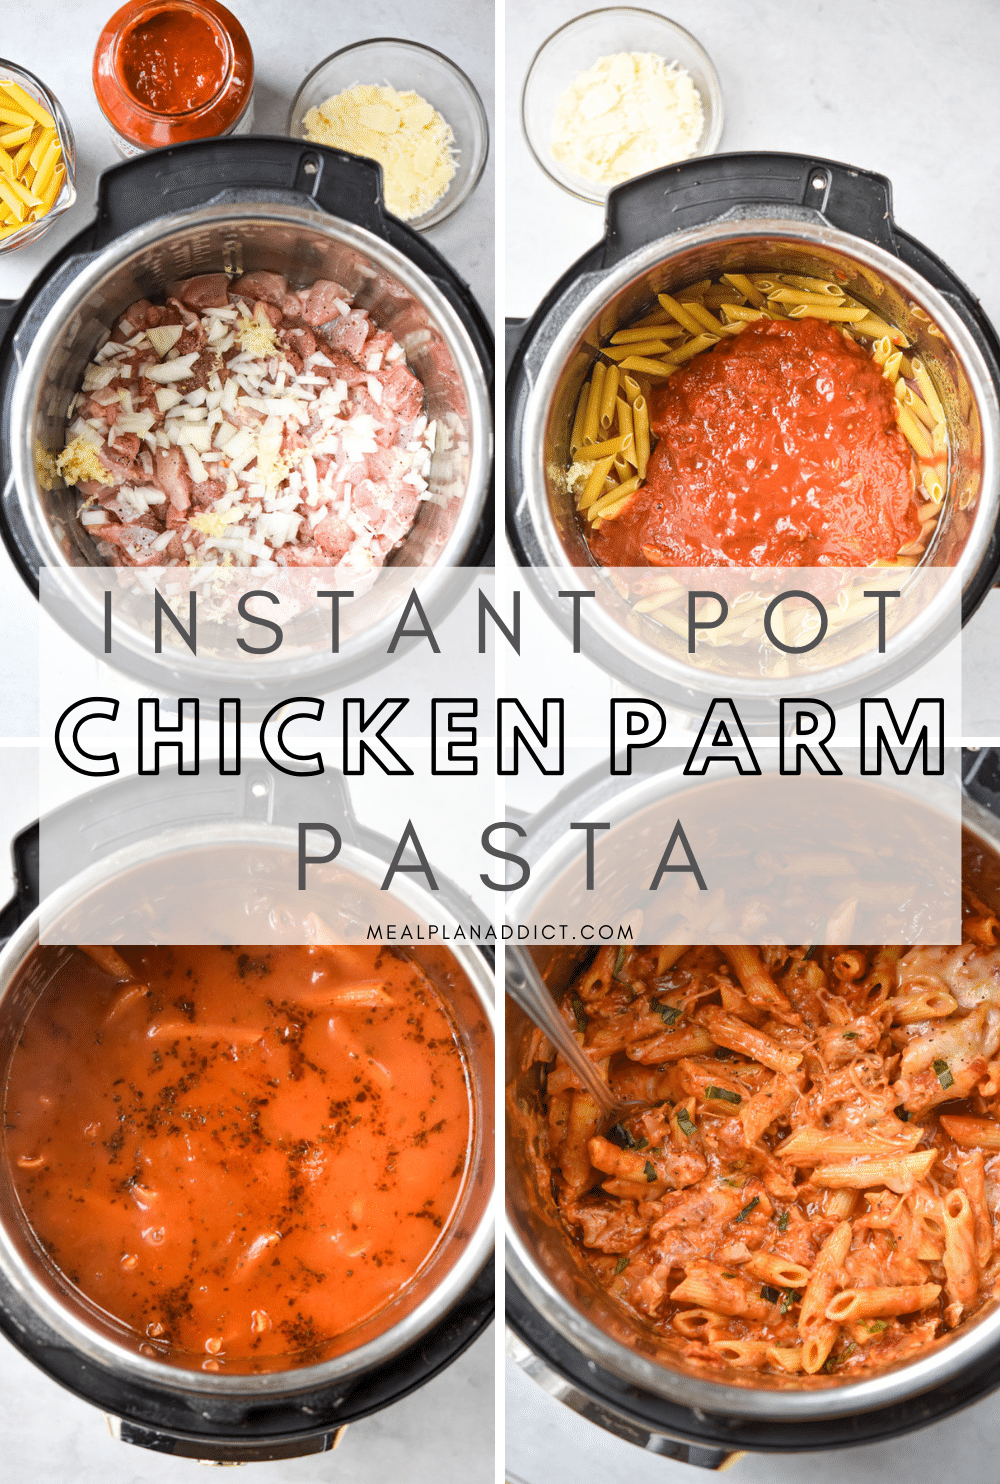 Dinner in Under 30 Minutes with This Instant Pot Chicken Parm Pasta